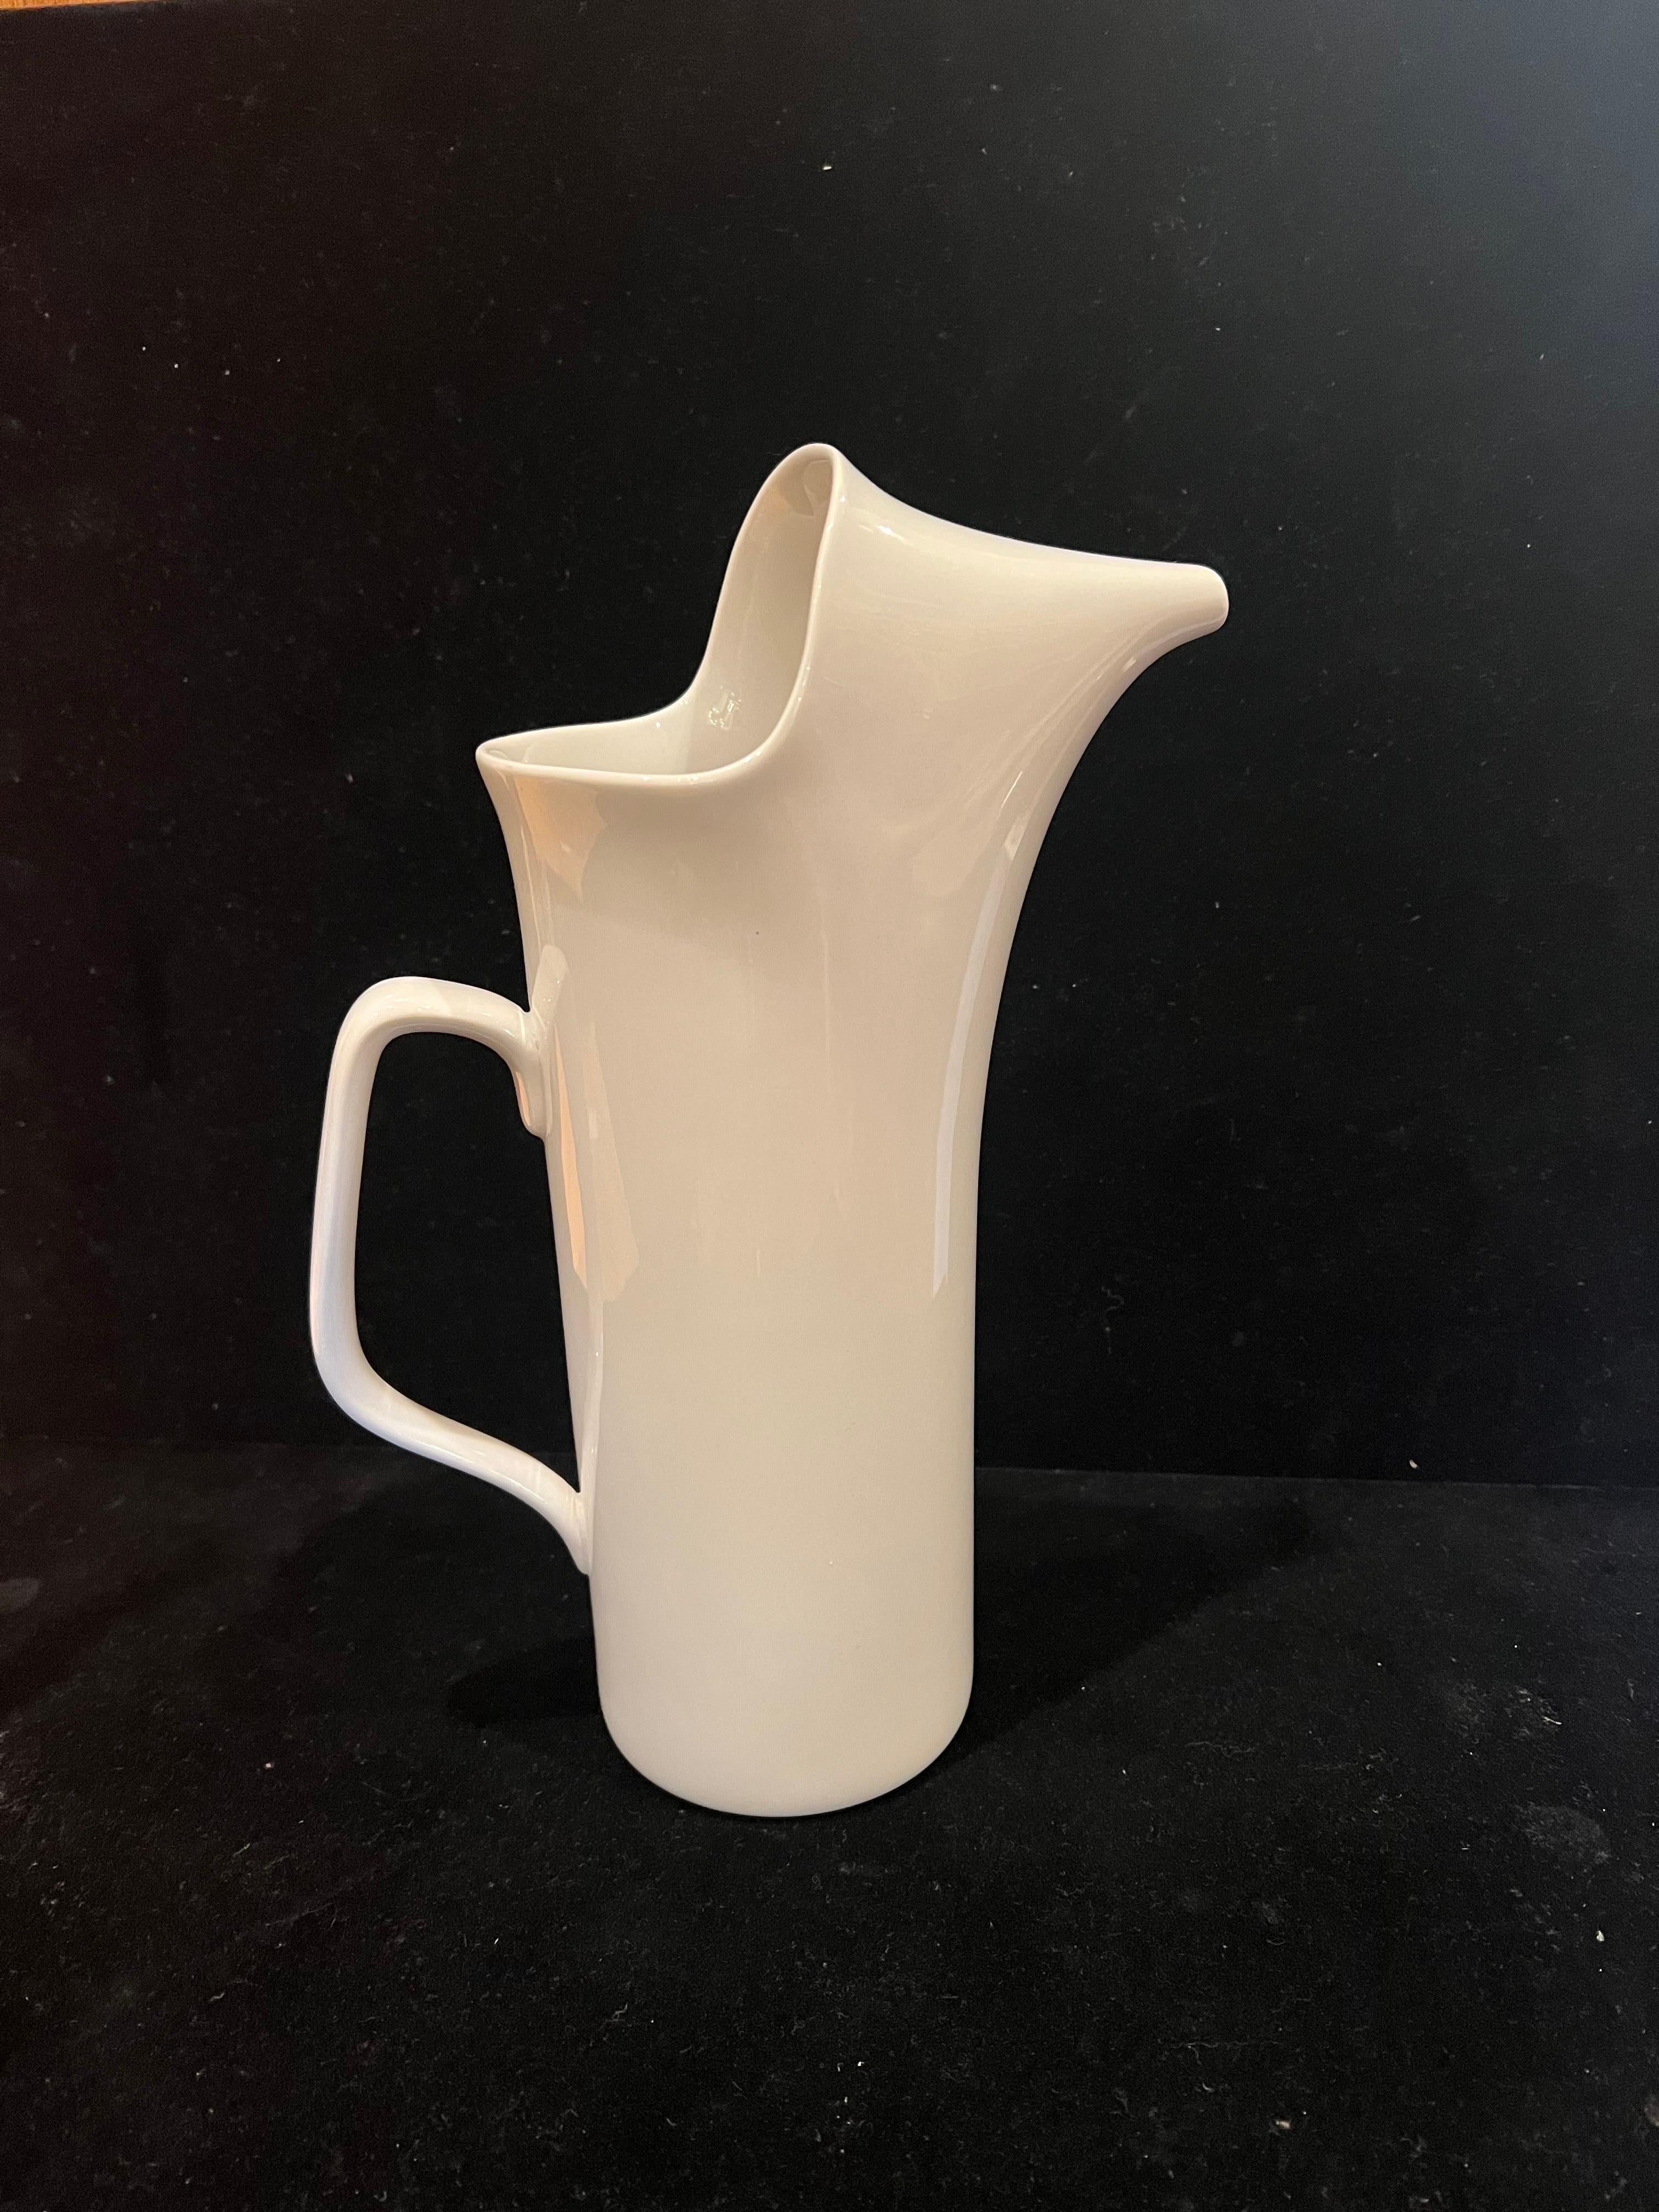 Beautiful MCM small ironstone porcelain pitcher (creamer) by Lagardo Tackett for Schmid, circa the 1950s. The piece is in excellent condition very rare because of the size .